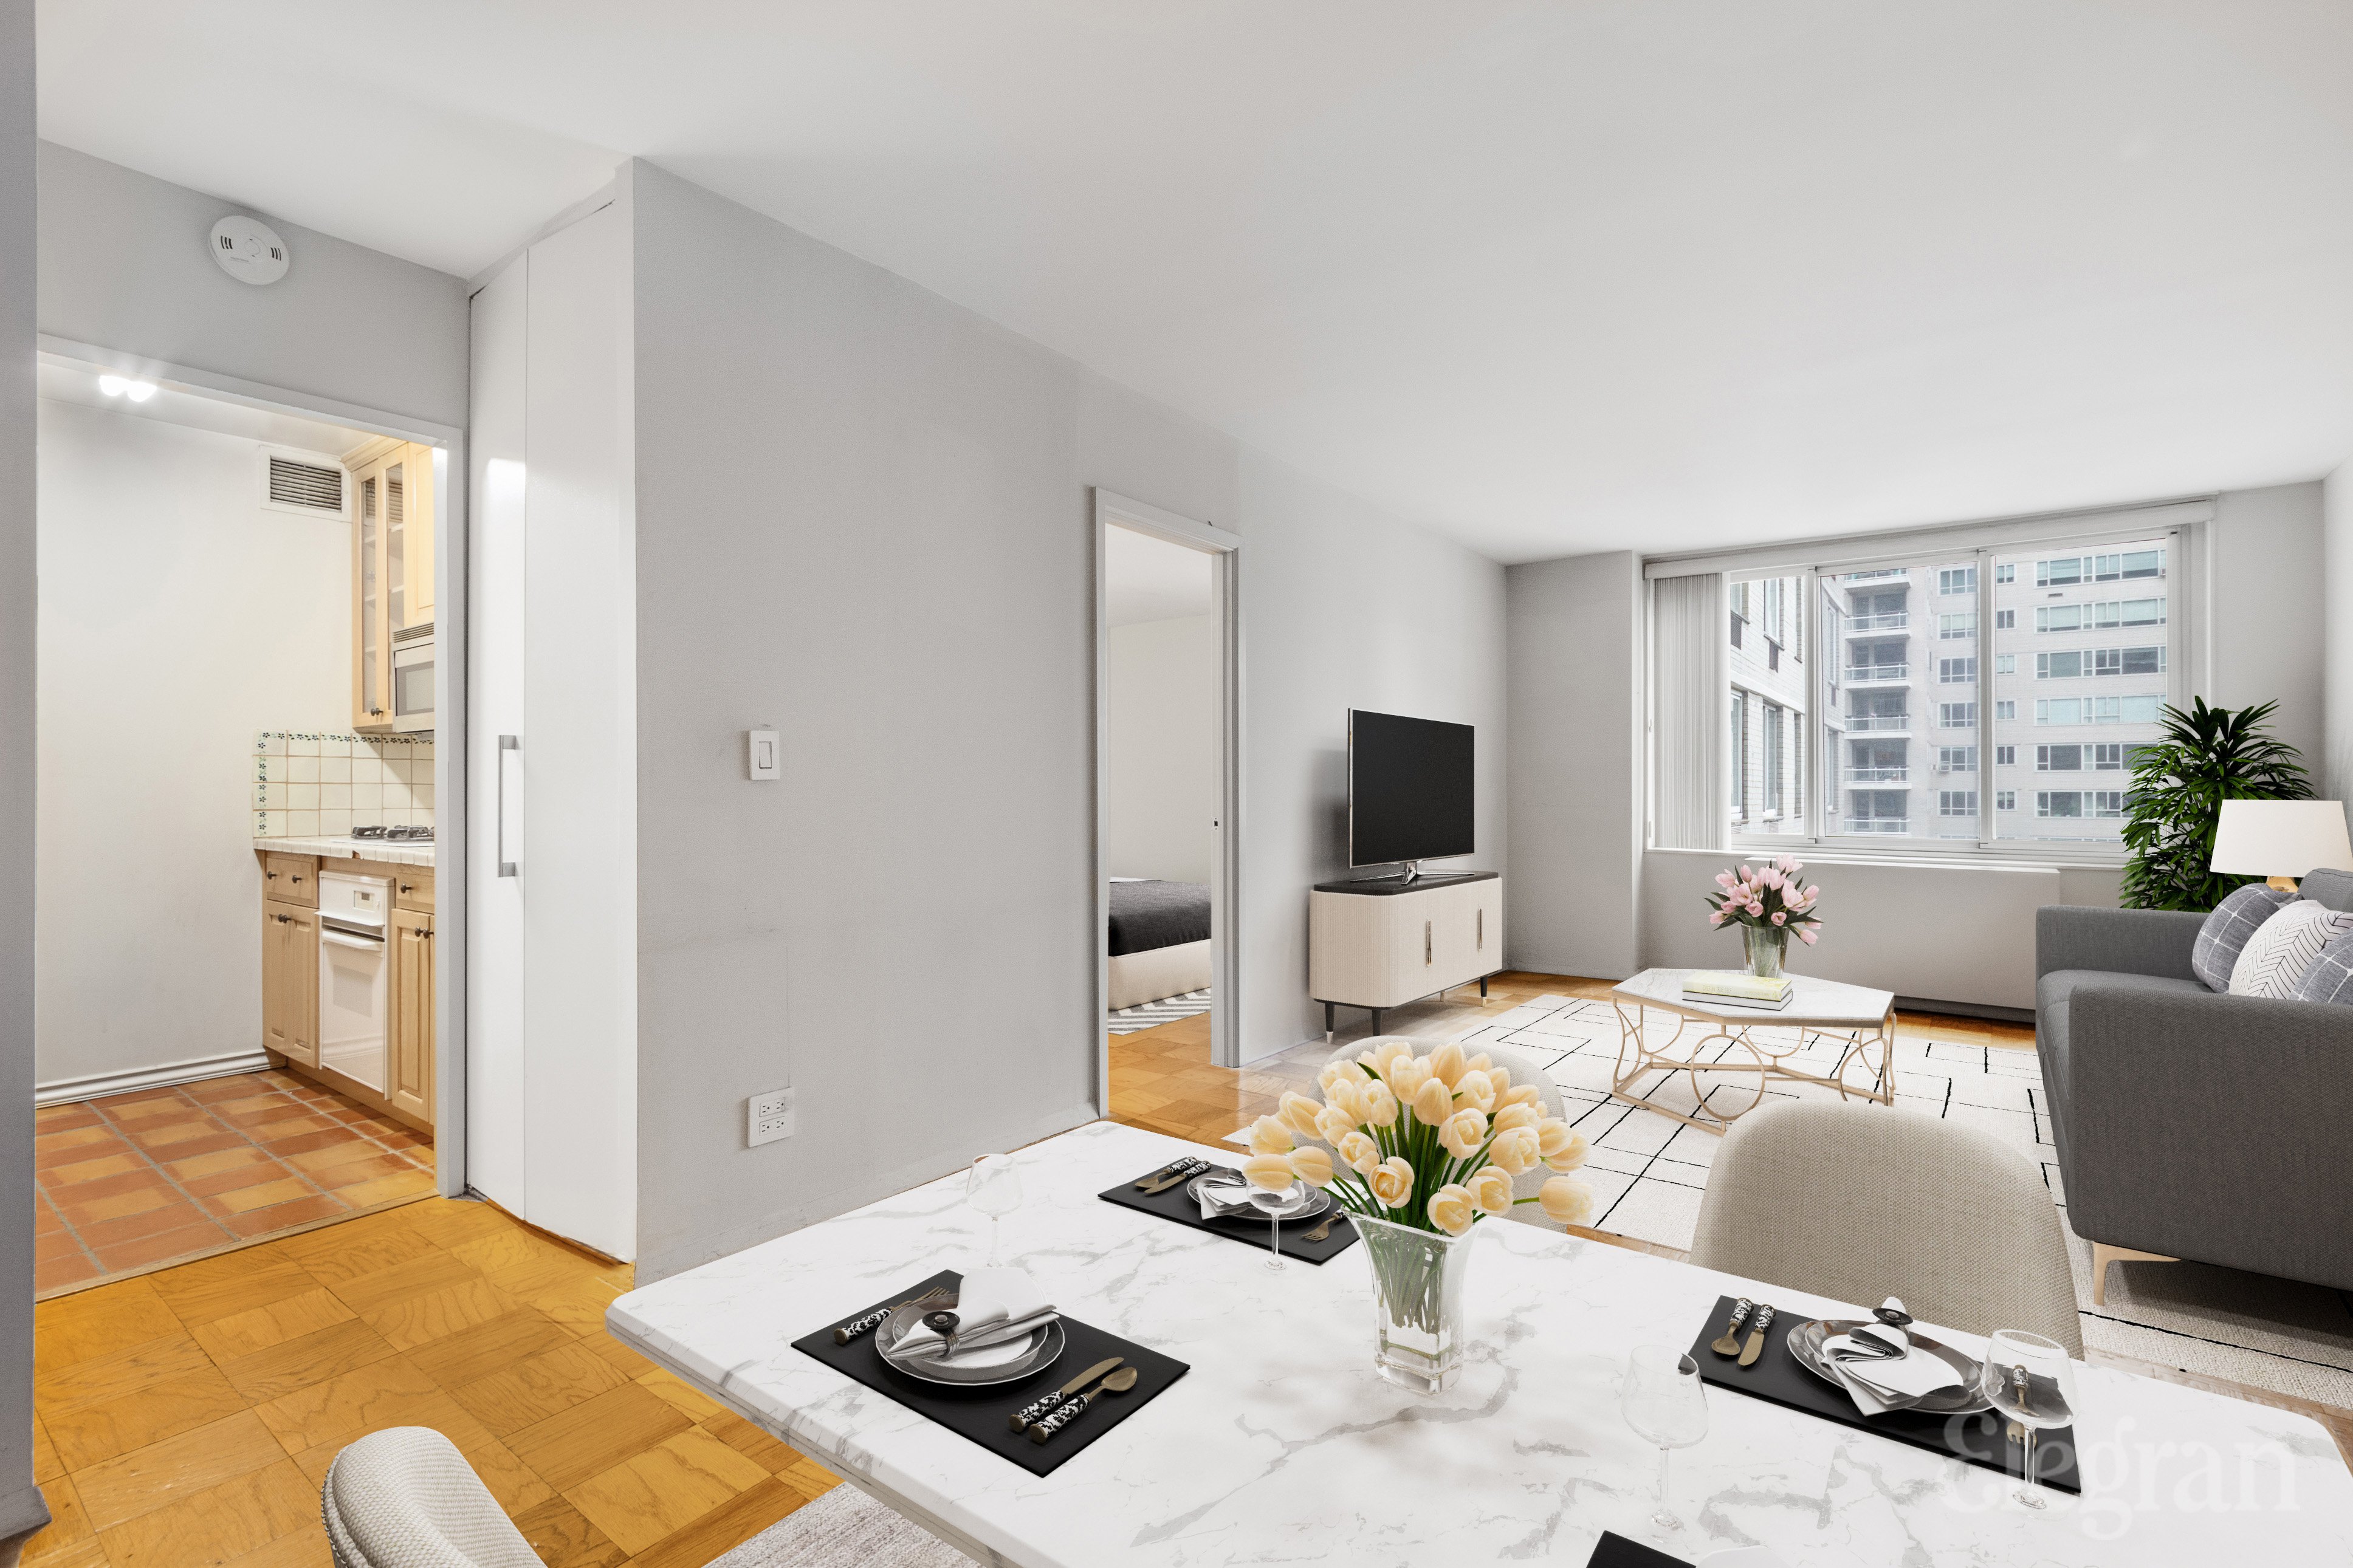 220 East 65th Street 11-A, Upper East Side, Upper East Side, NYC - 1 Bedrooms  
1 Bathrooms  
3 Rooms - 